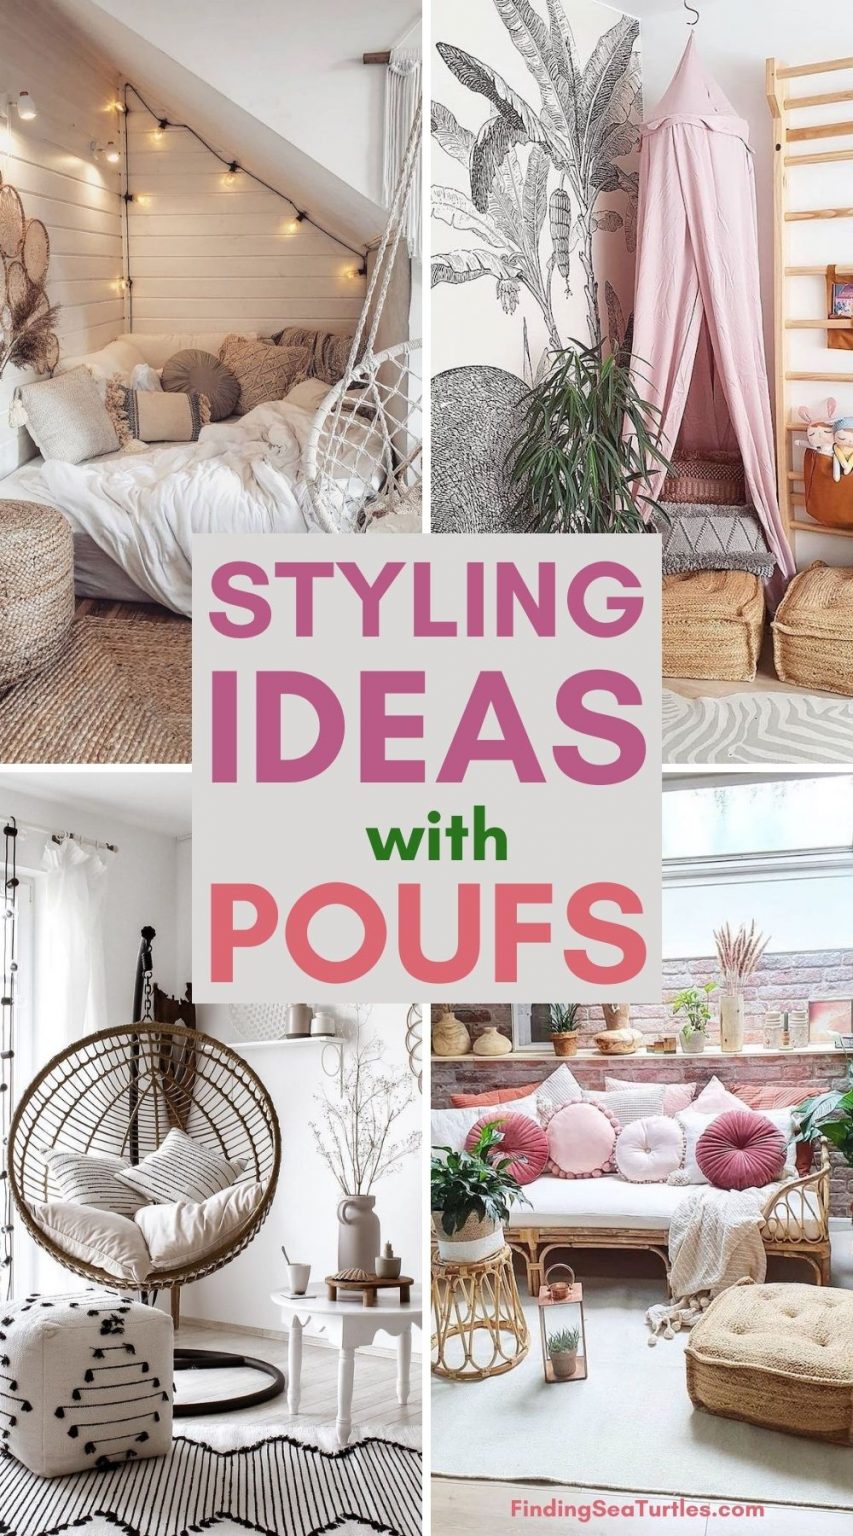 19 Most Inspiring Pouf Styling Ideas to Use Today